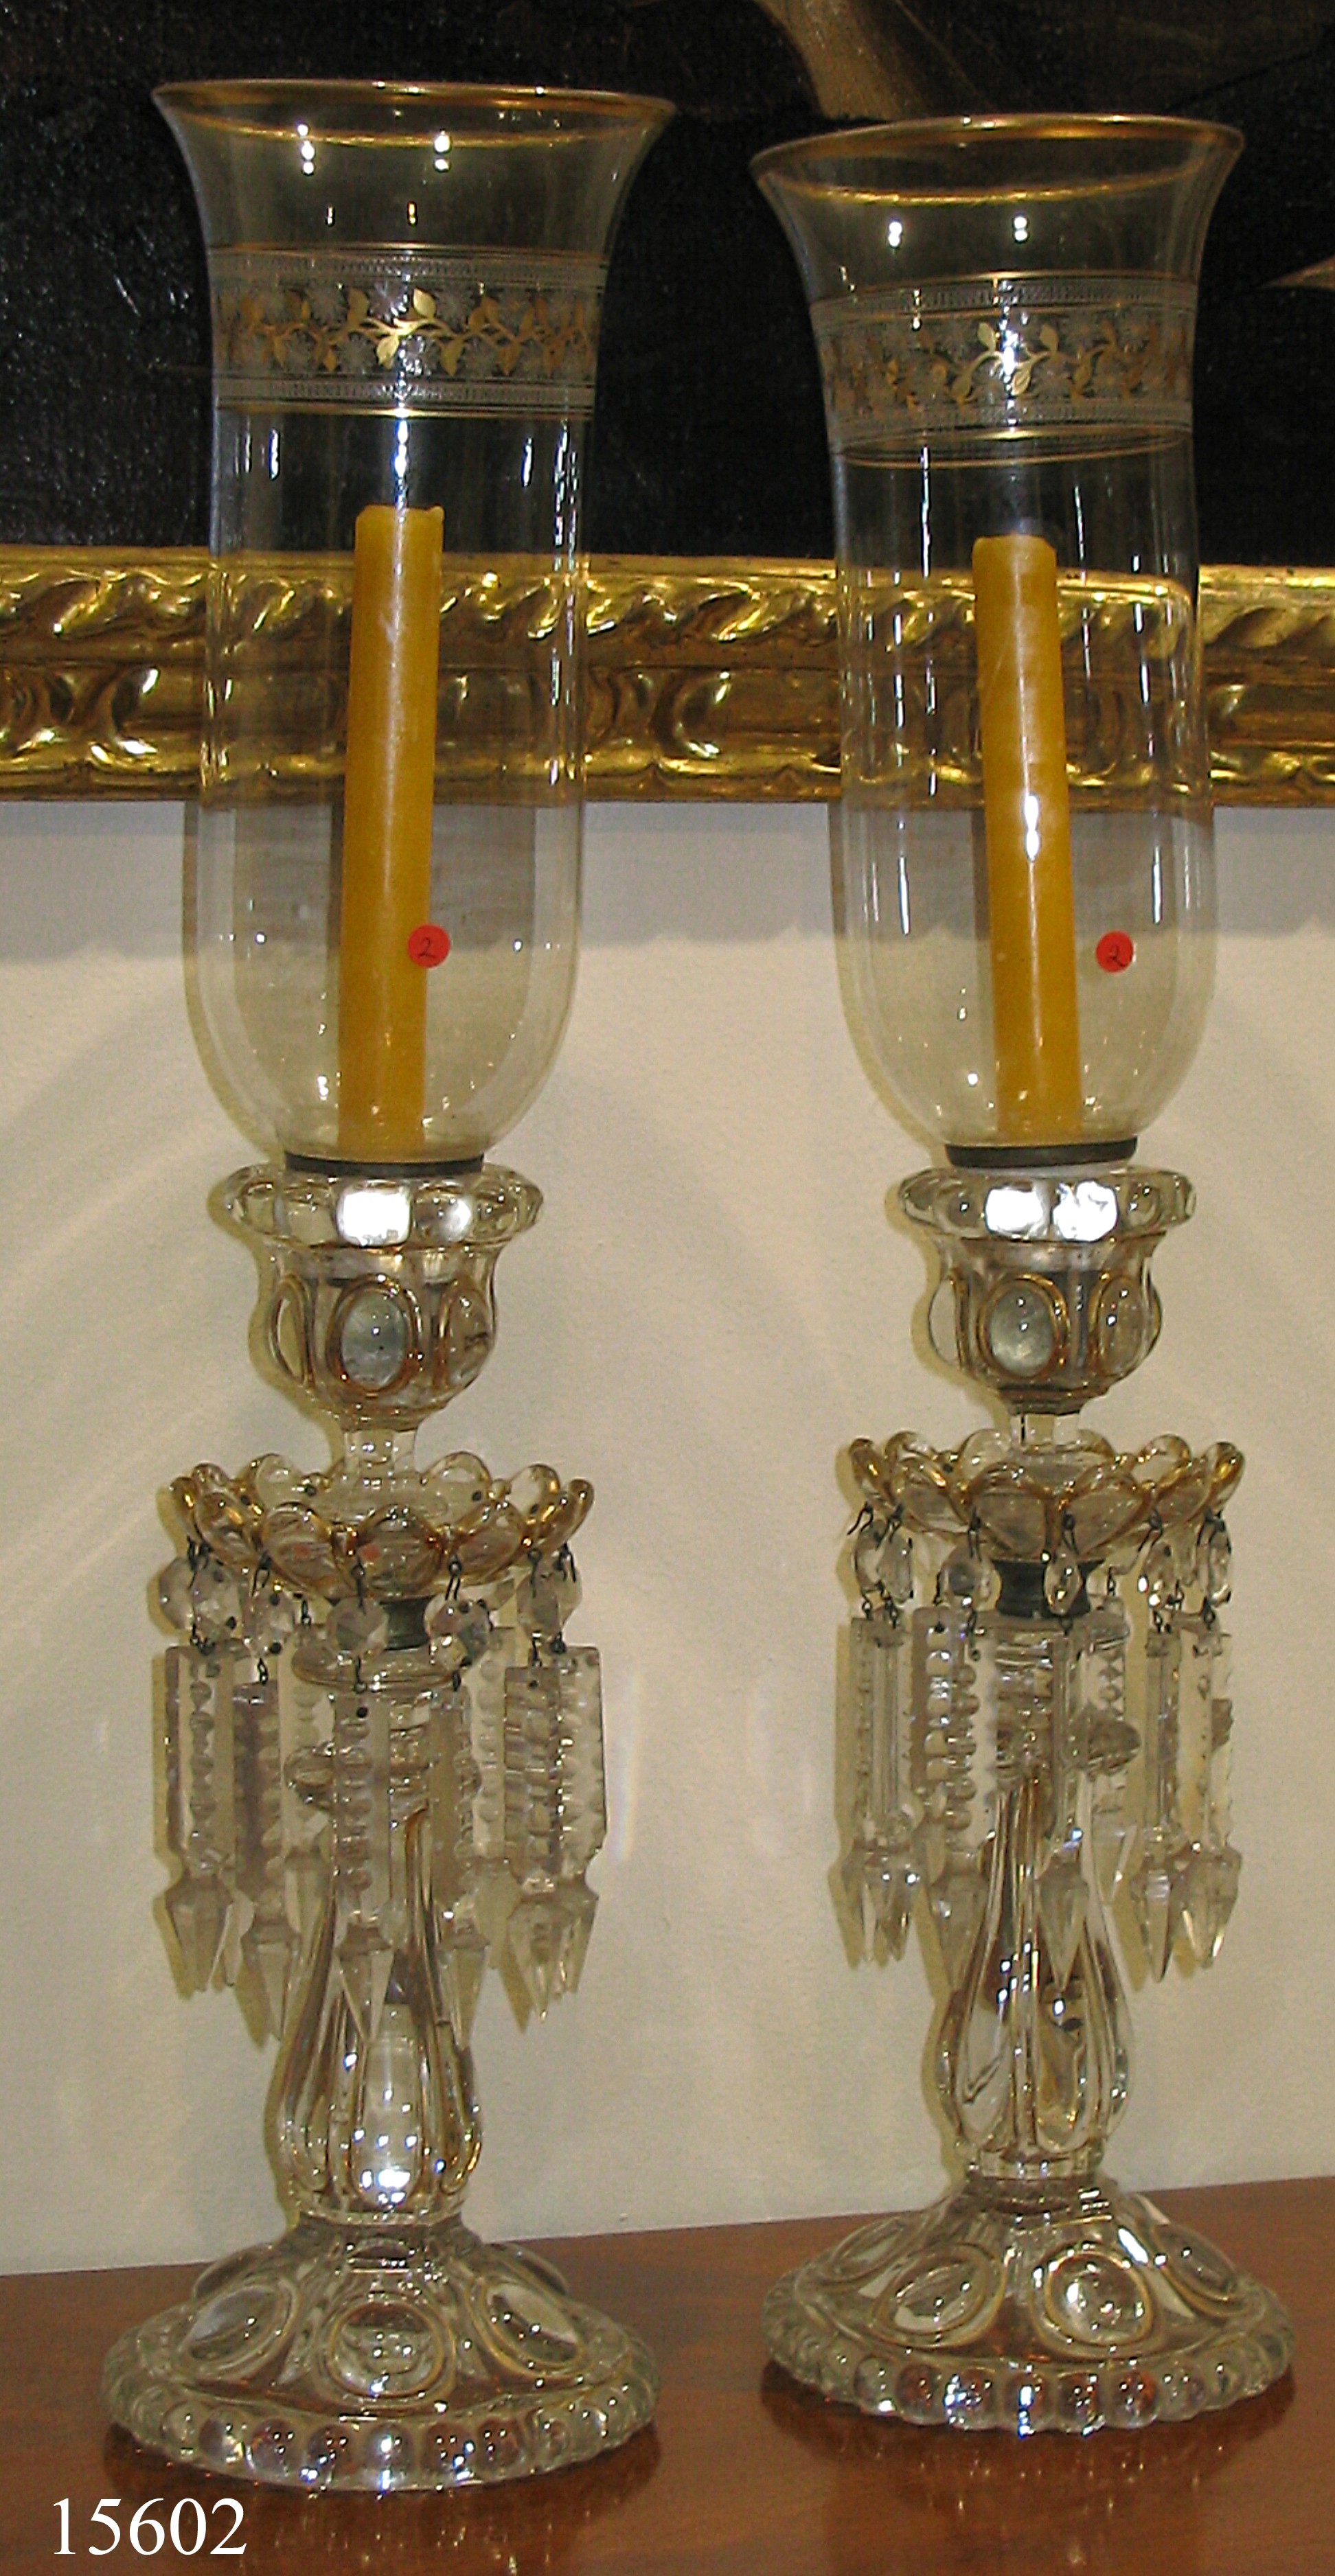 Pair of Victorian Candle Holders - PERSEPOLIS